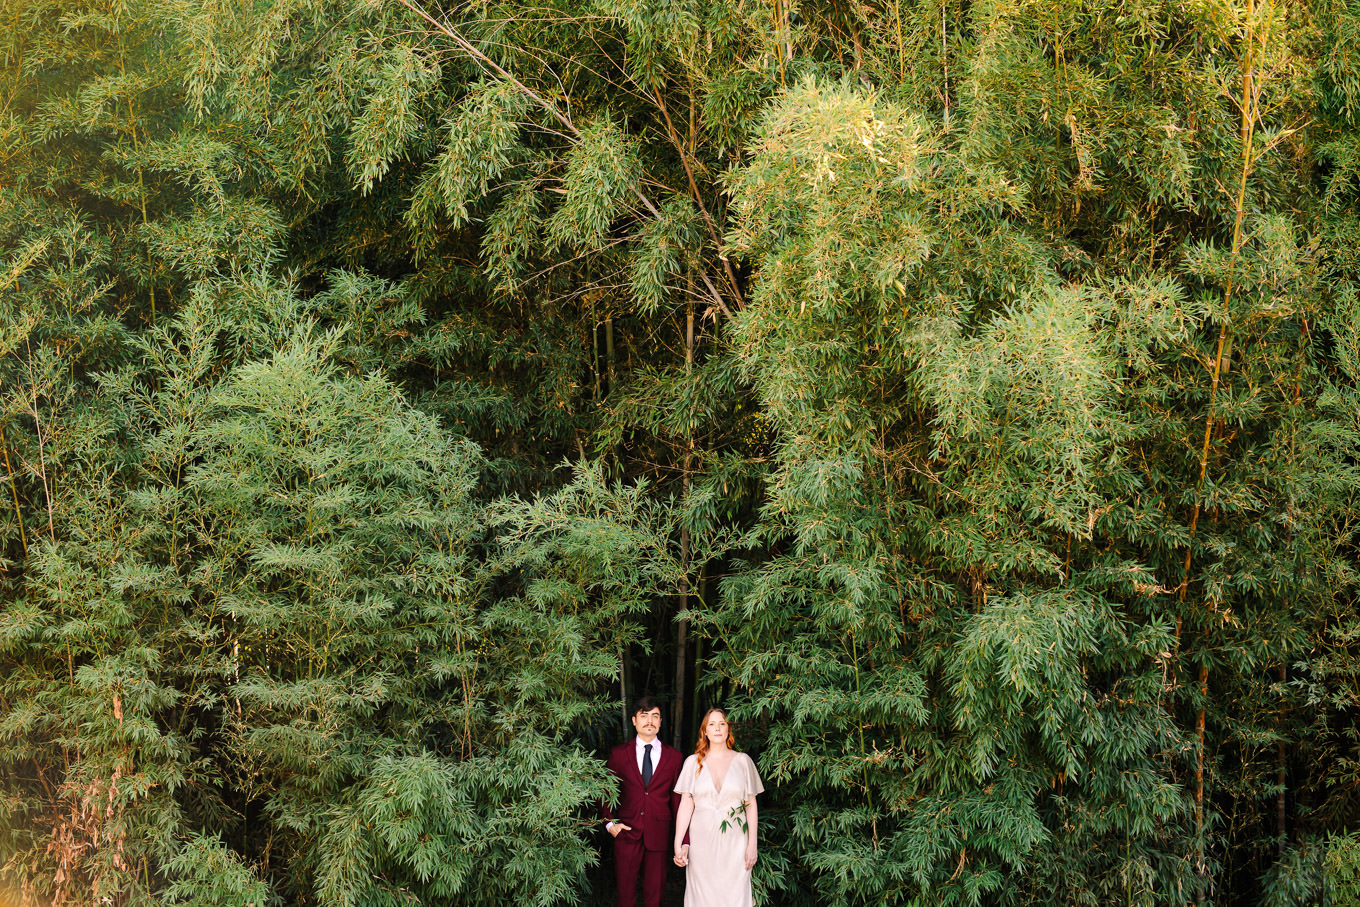 Wide shot of couple in bamboo forest | Los Angeles Arboretum Elopement | Colorful and elevated wedding photography for fun-loving couples in Southern California | #LosAngelesElopement #elopement #LAarboretum #LAskyline #elopementphotos   Source: Mary Costa Photography | Los Angeles